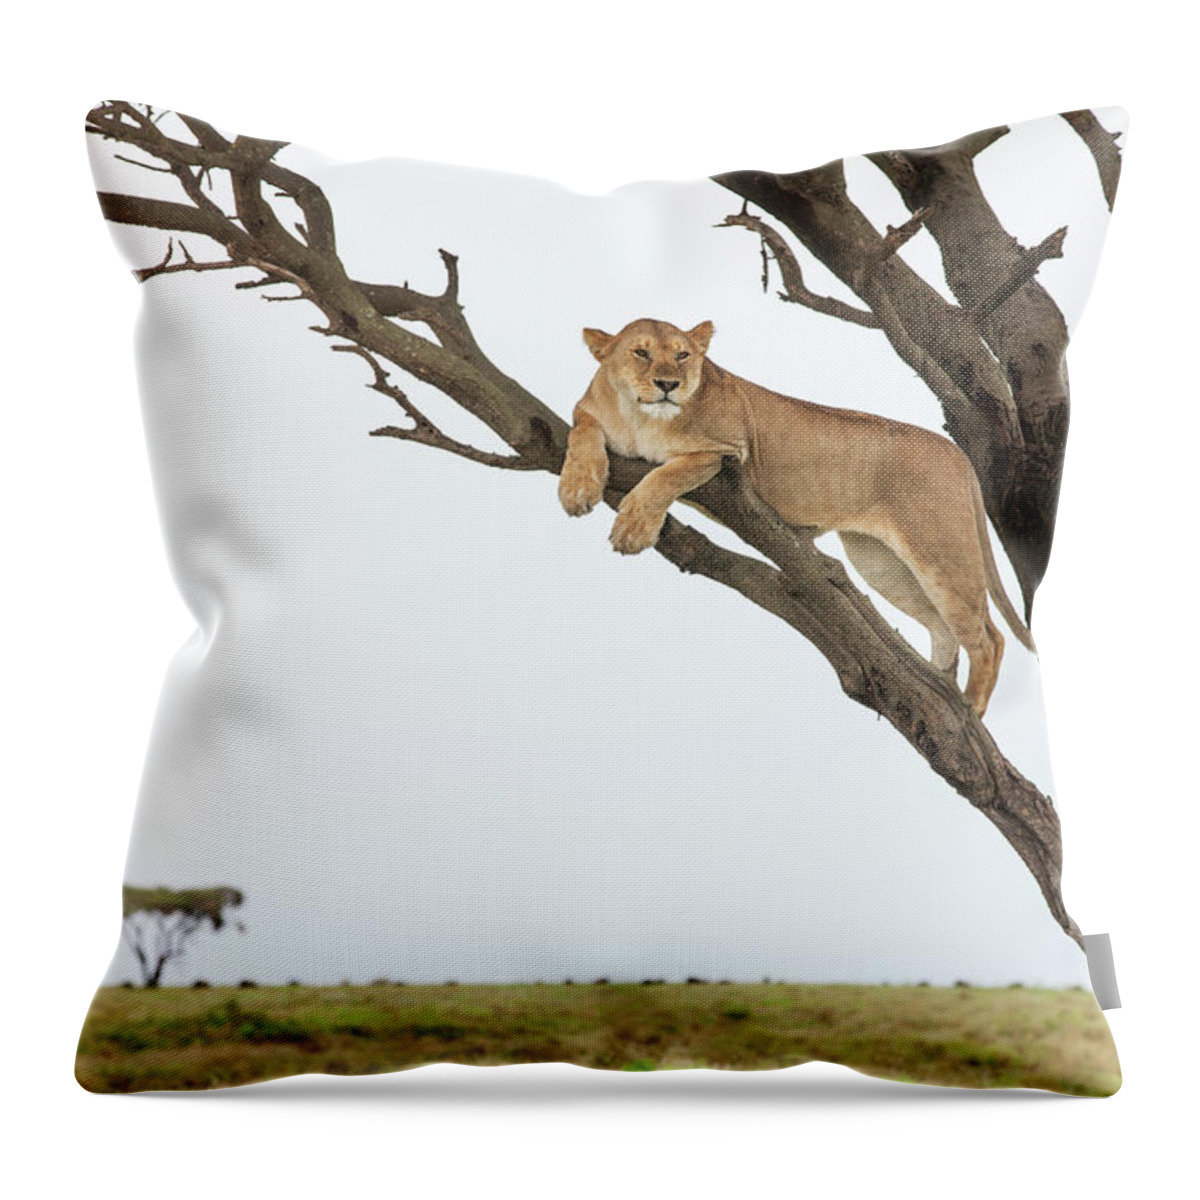 Grass Throw Pillow featuring the photograph Lioness In Tree, Ngorongoro, Tanzania by Paul Souders